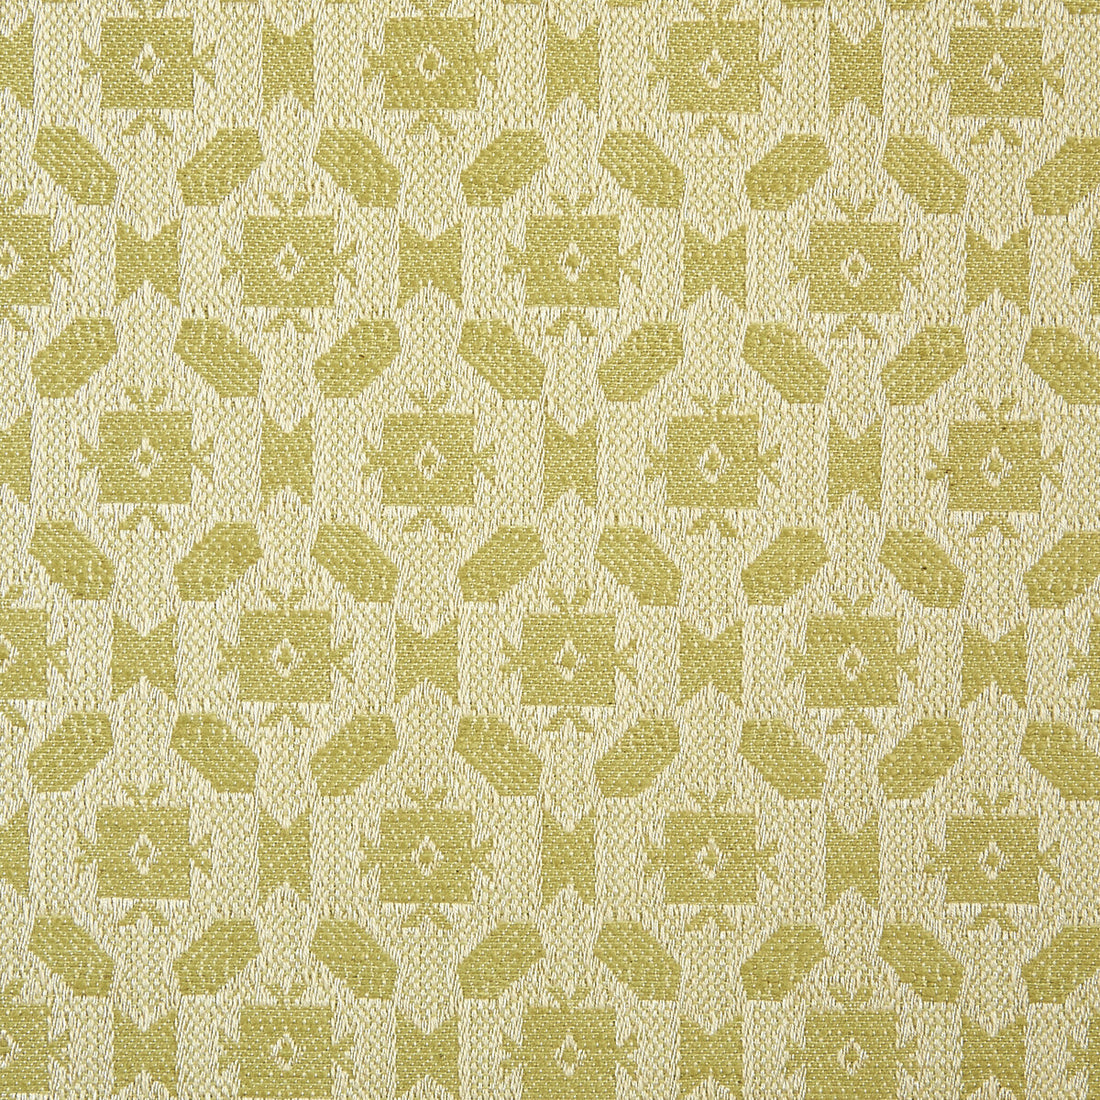 Lowell fabric in lime color - pattern BFC-3635.30.0 - by Lee Jofa in the Blithfield collection